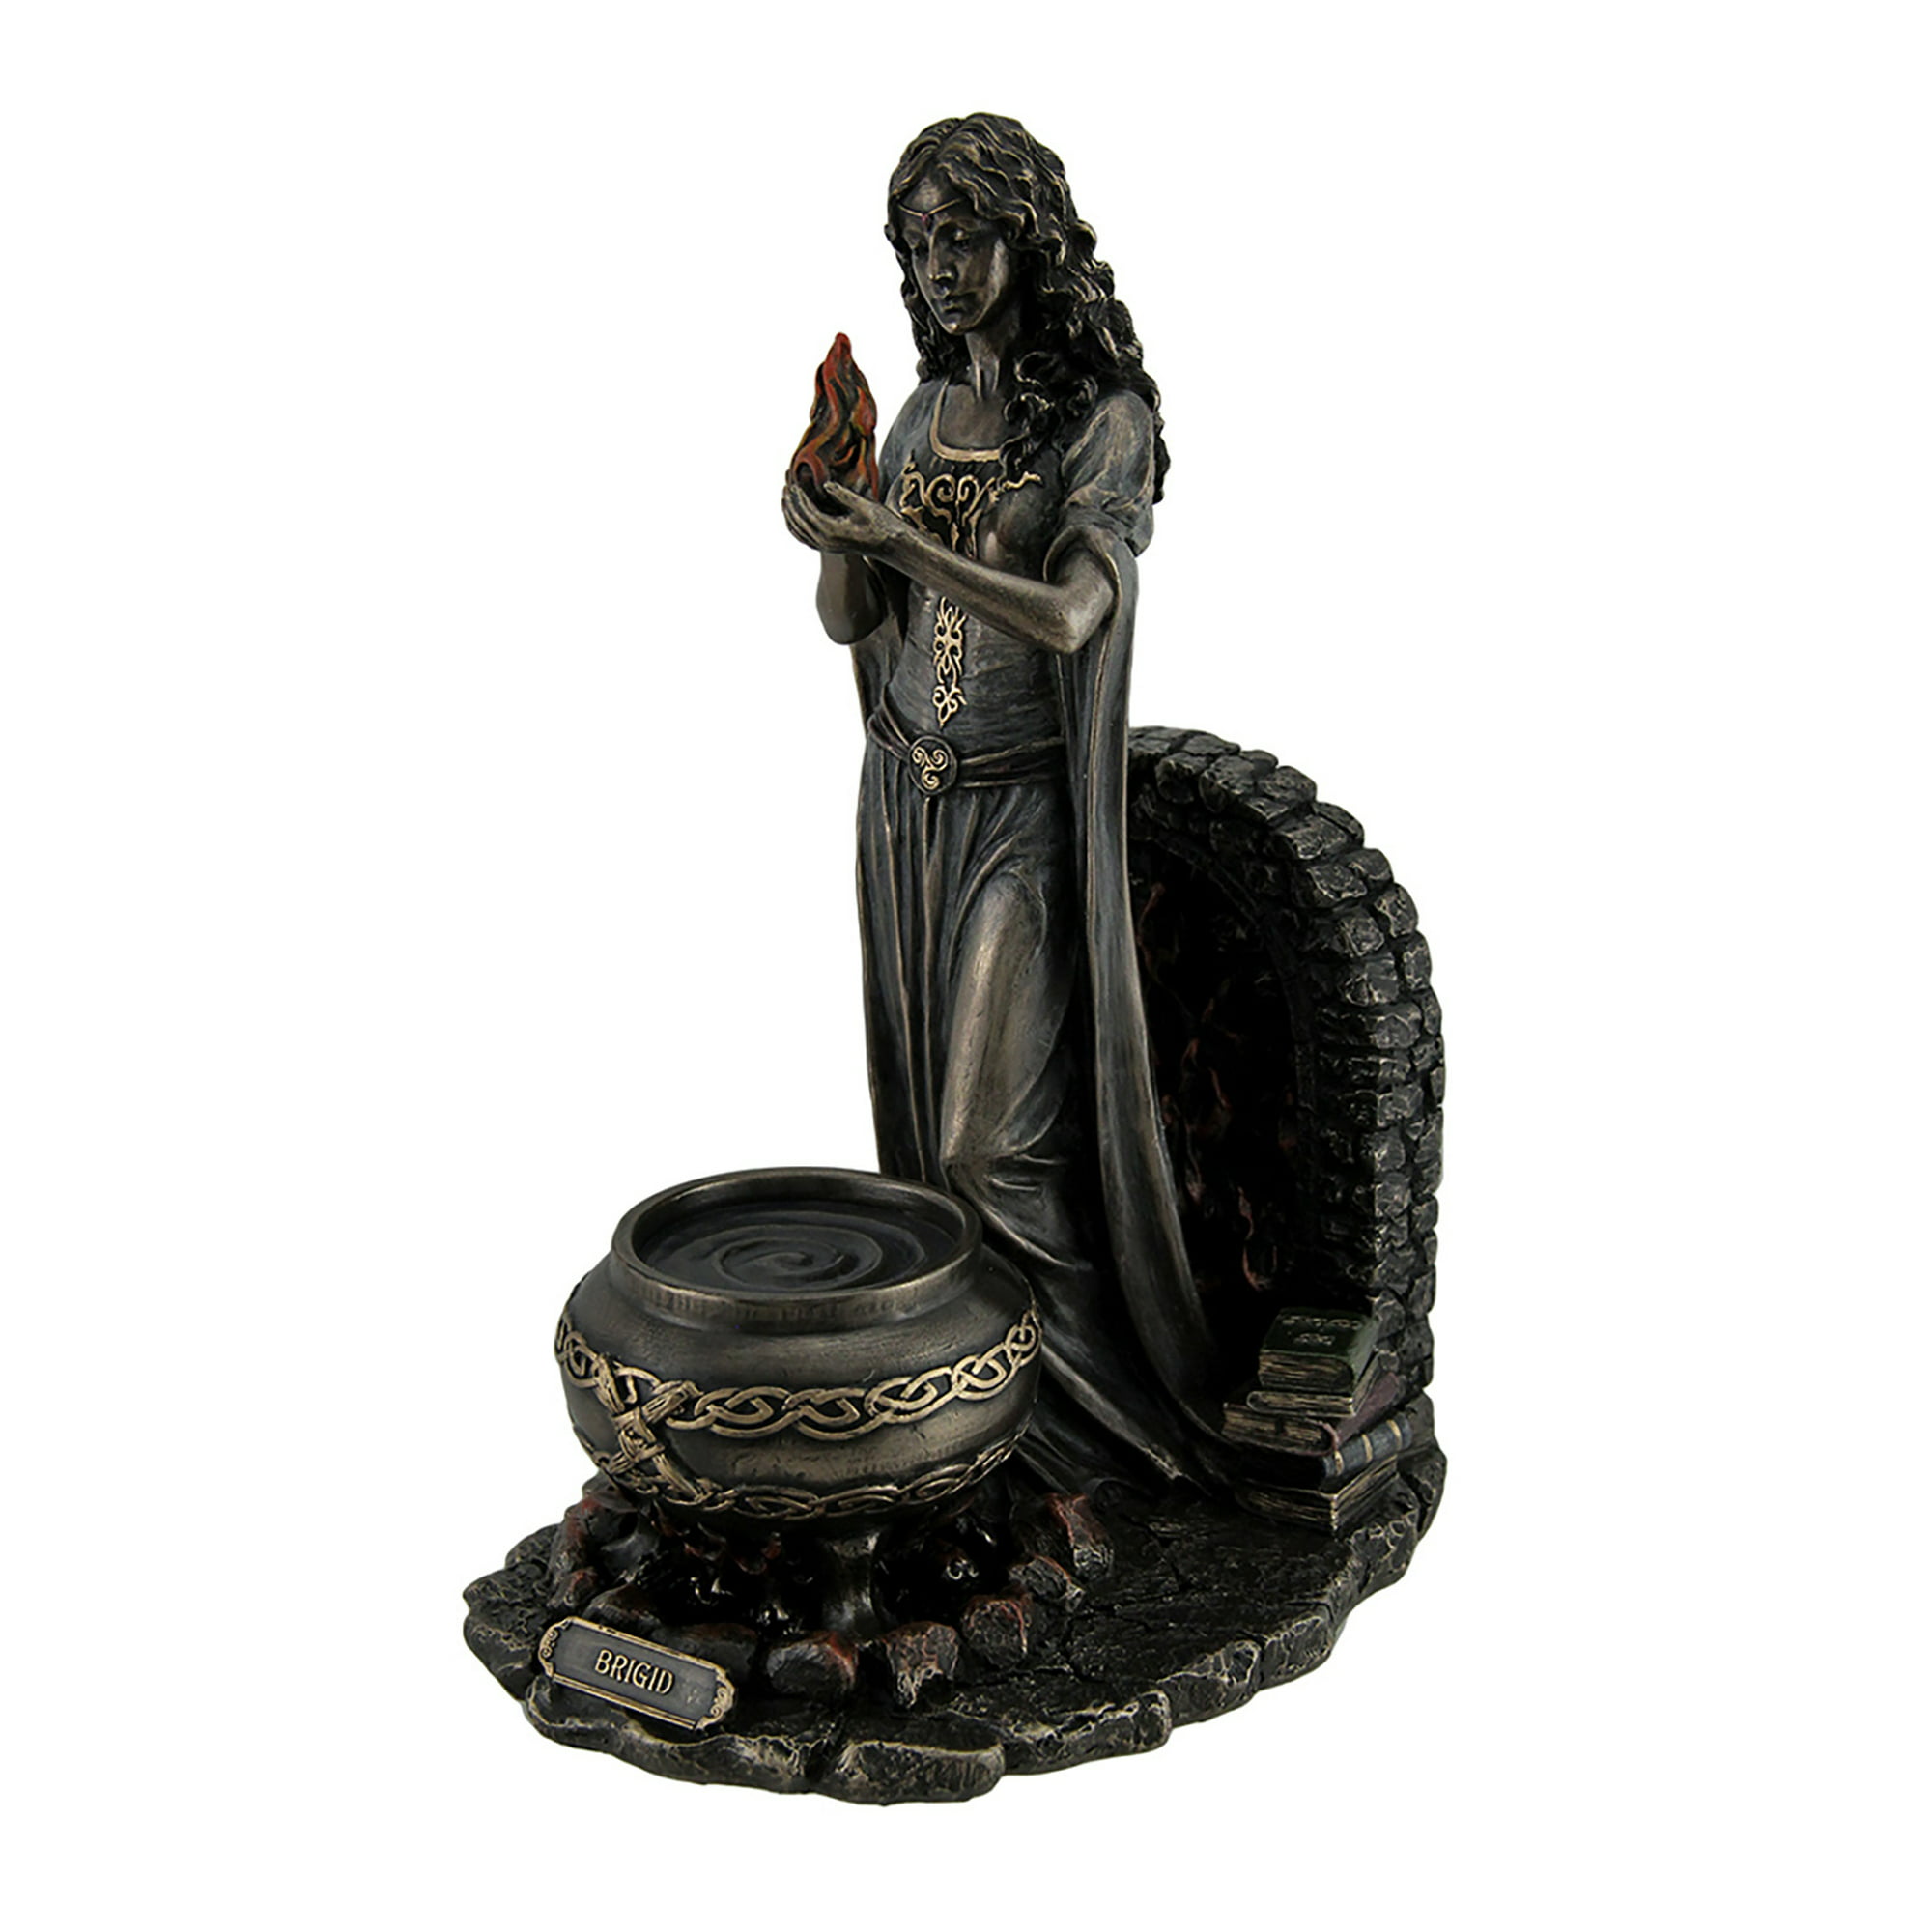 Brigid Goddess of Hearth & Home Standing Holding Sacred Flame Statue